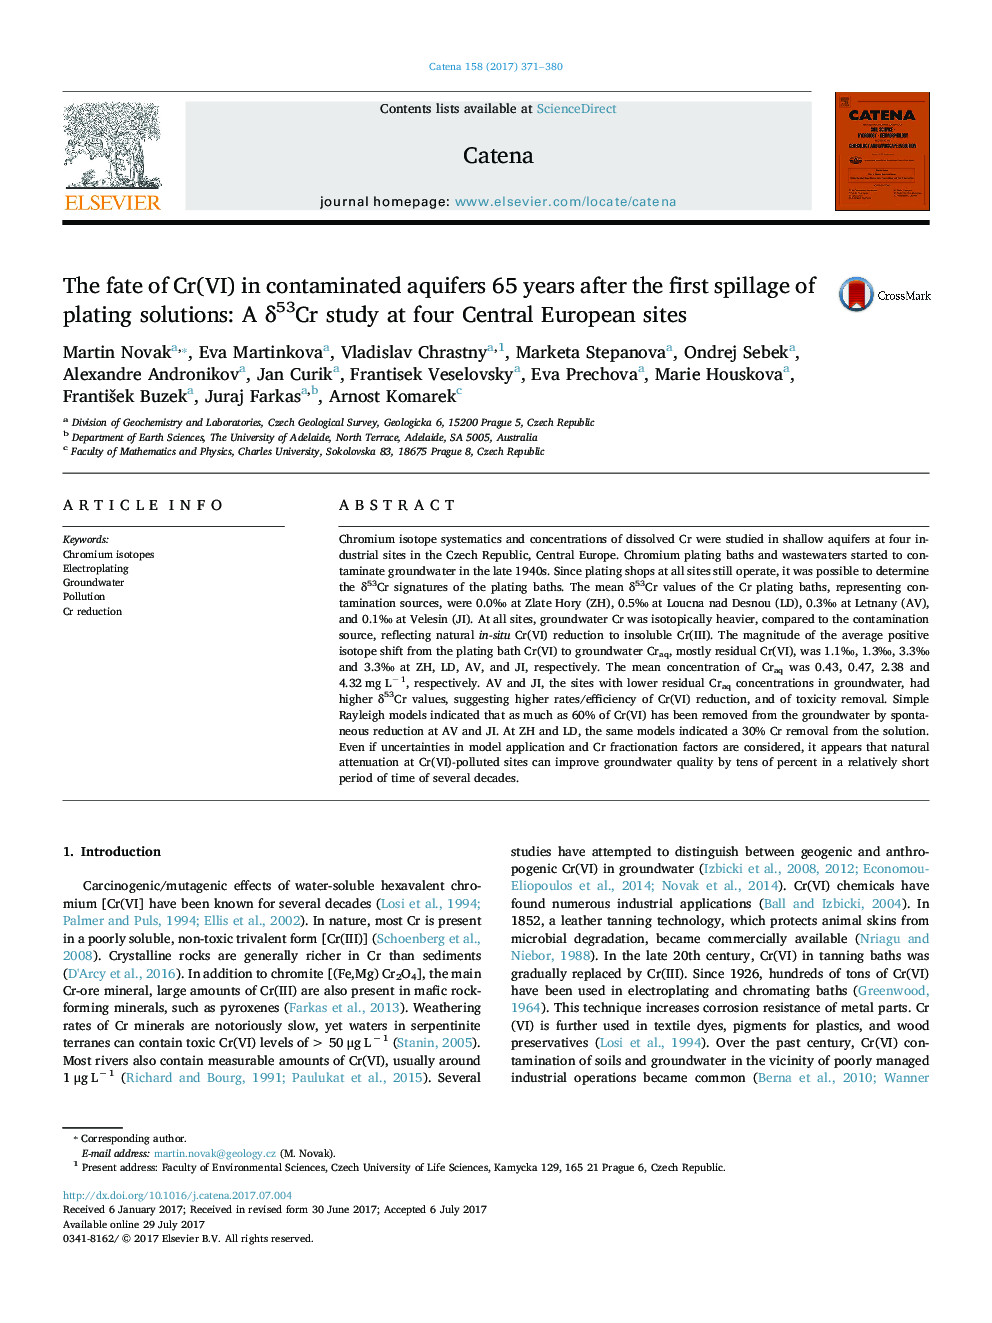 The fate of Cr(VI) in contaminated aquifers 65Â years after the first spillage of plating solutions: A Î´53Cr study at four Central European sites